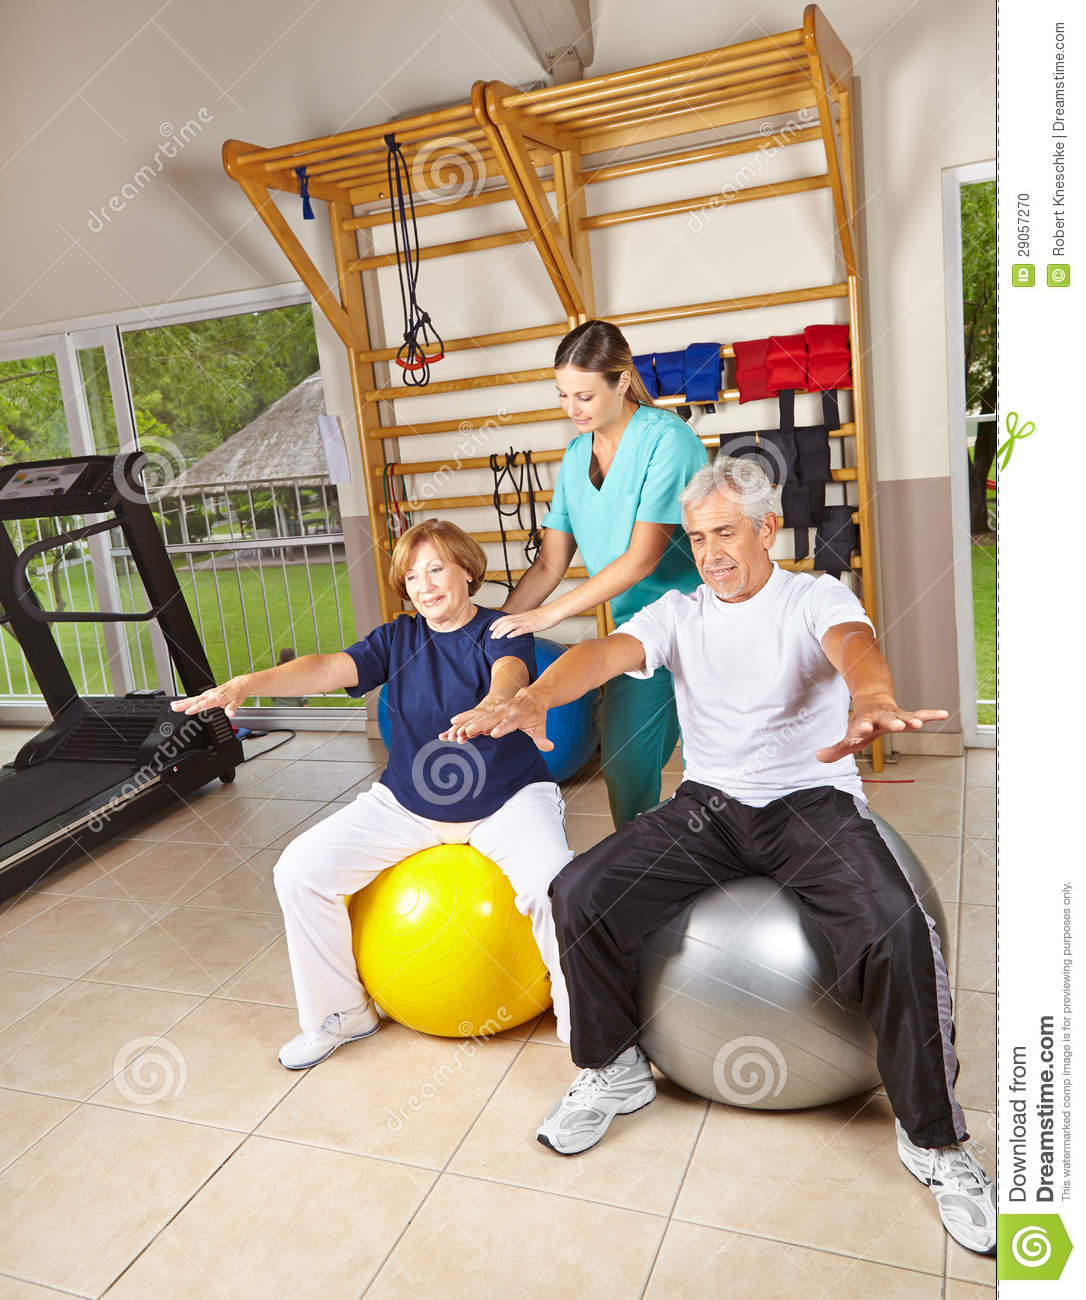 More Similar Stock Images Of   Senior People Doing Rehab